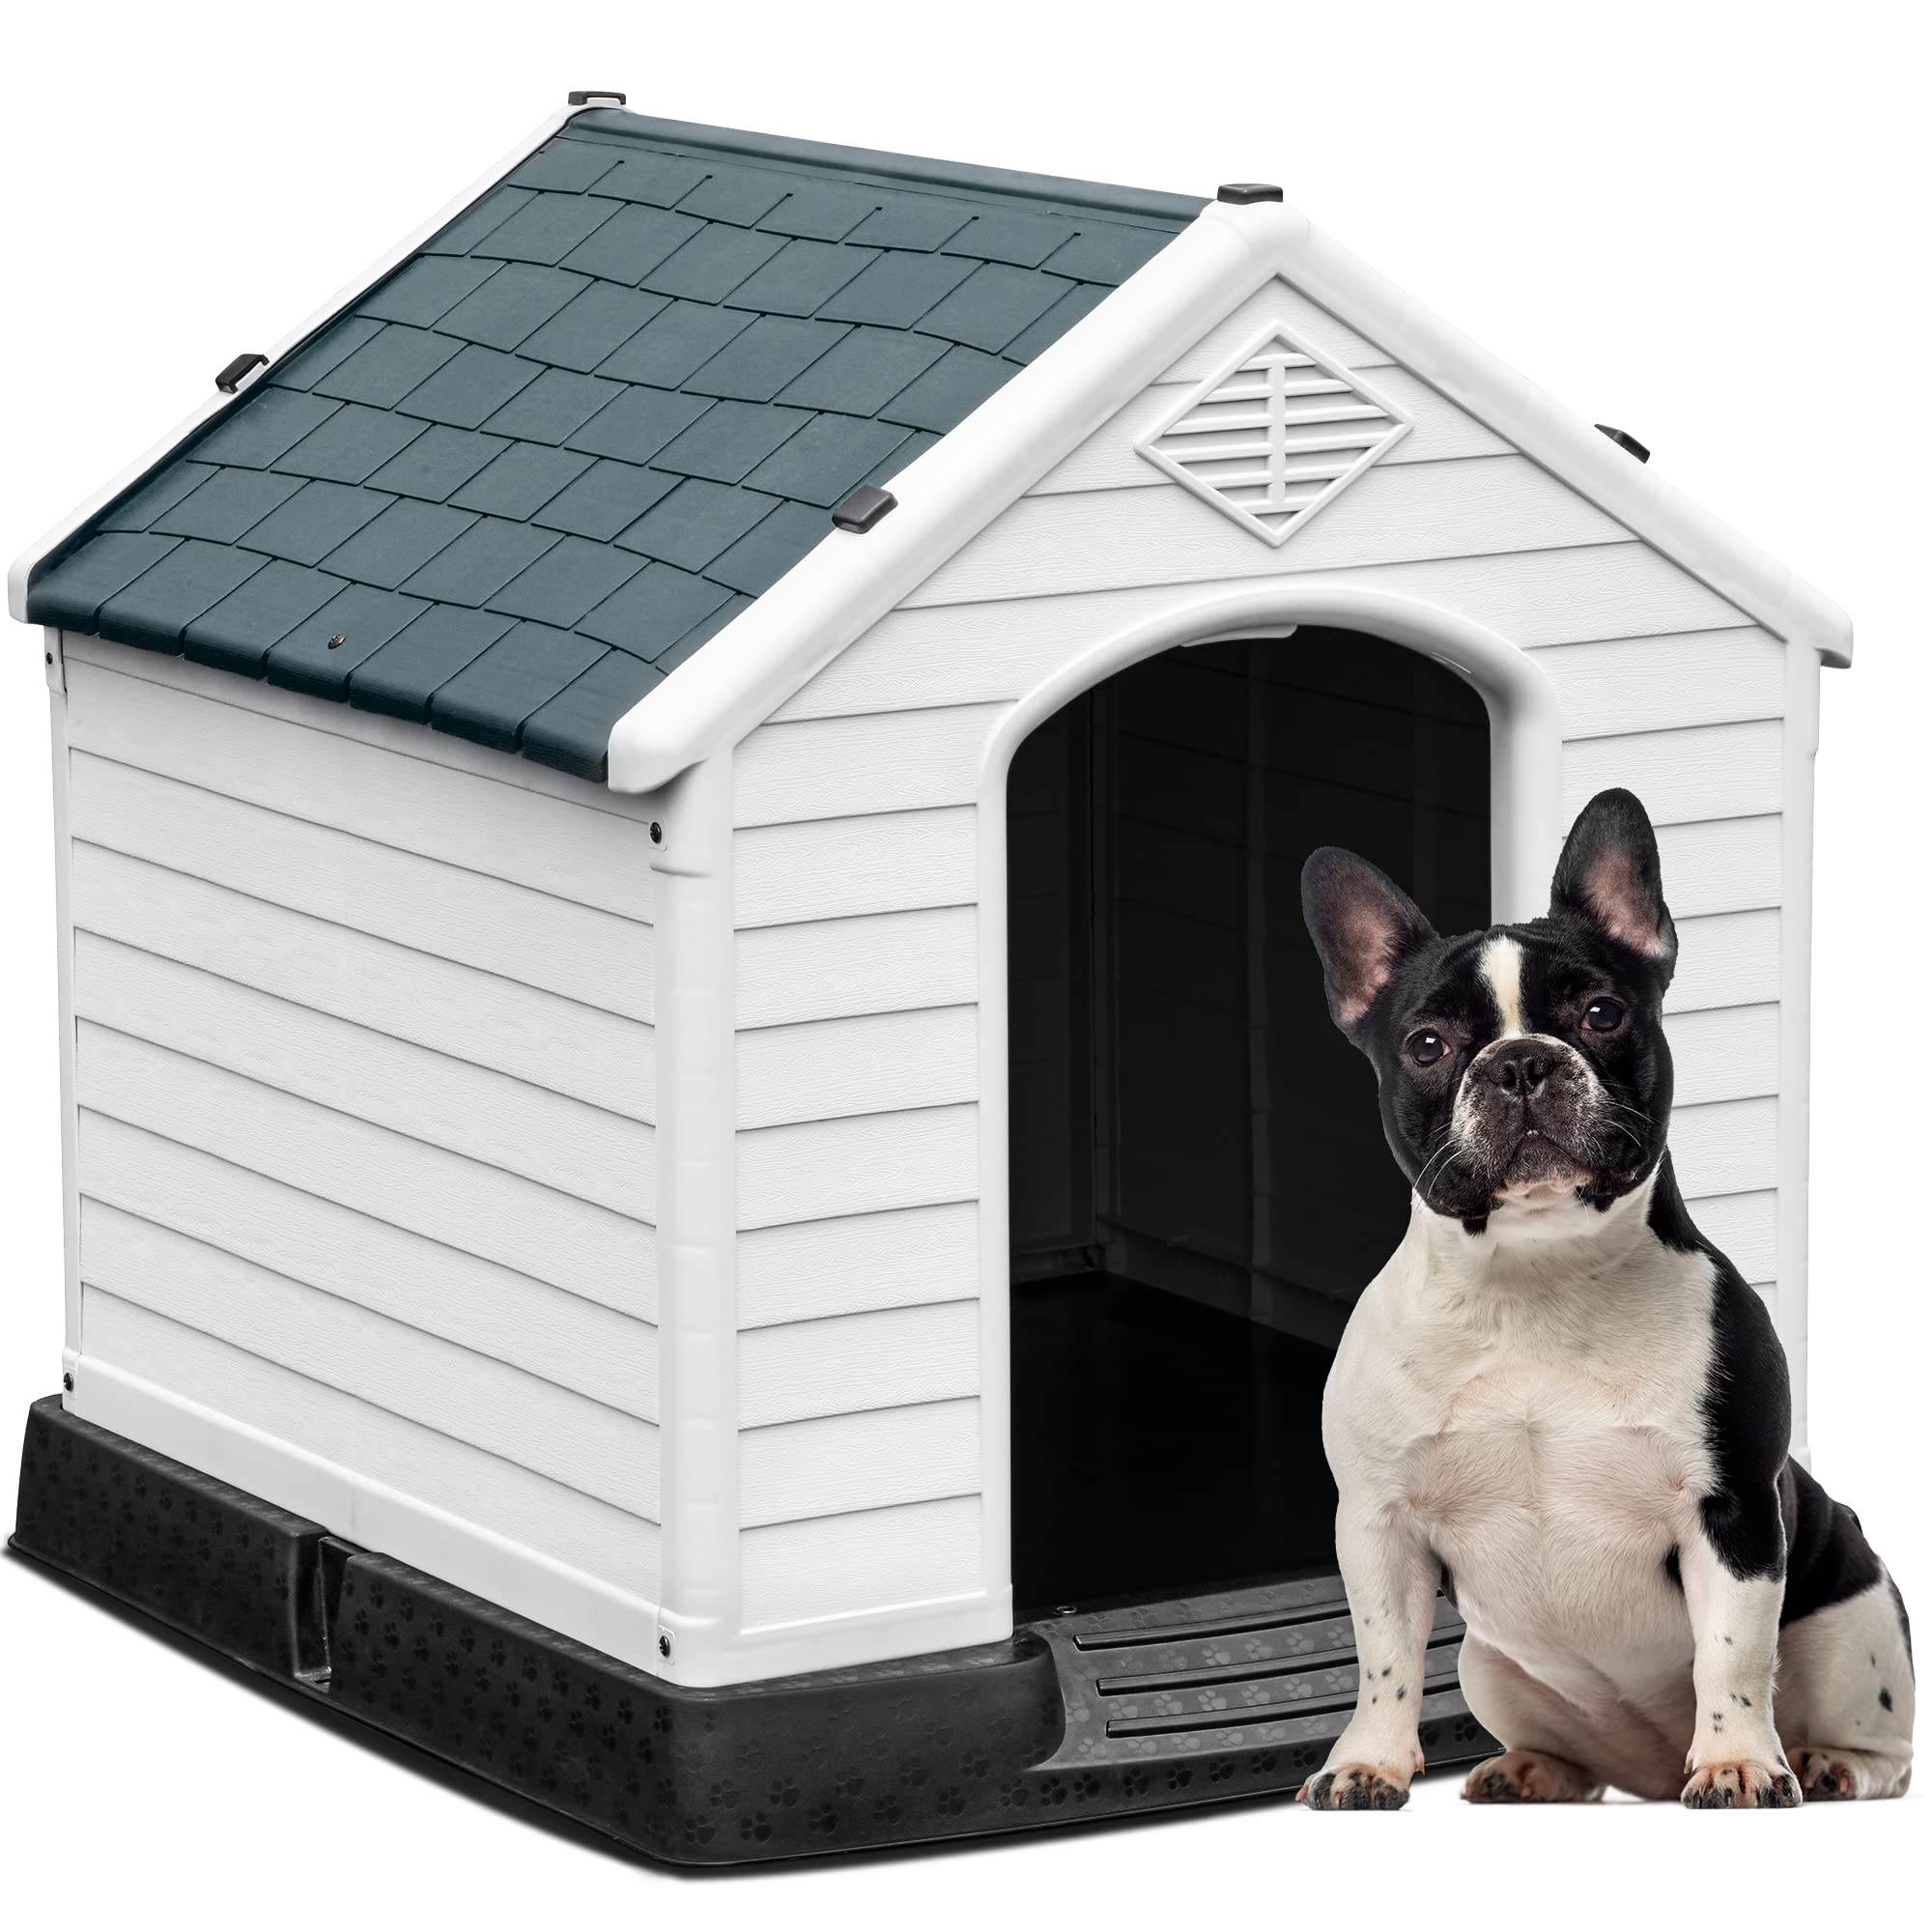 YITAHOME 28.5'' Large Plastic Dog House Outdoor Indoor Doghouse Puppy Shelter Water Resistant Easy Assembly Sturdy Dog Kennel wi